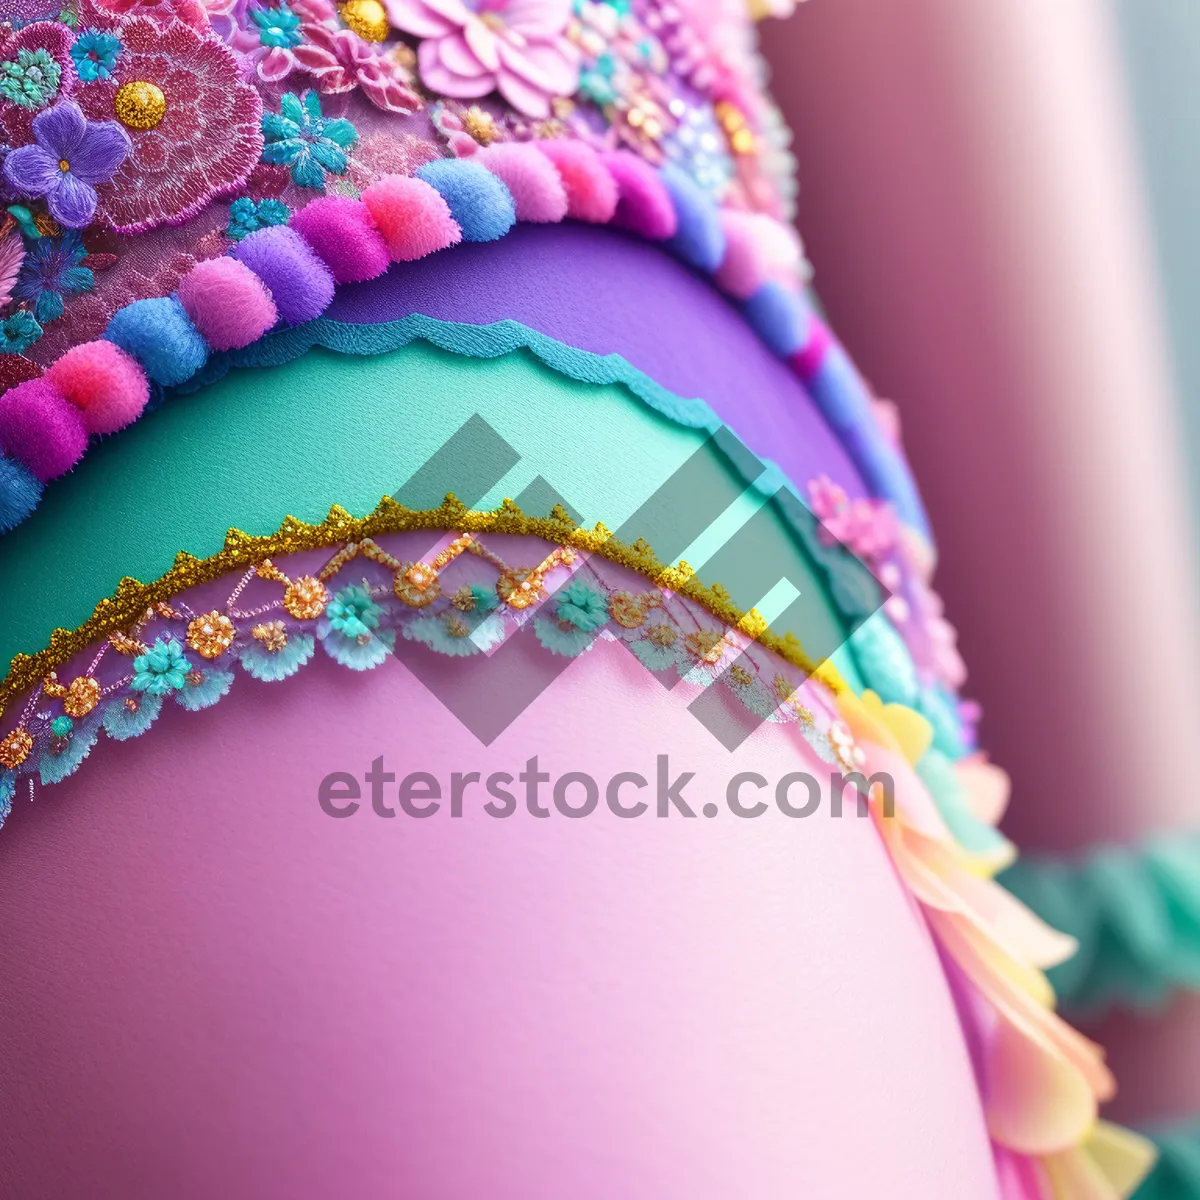 Picture of Vibrant Bangles in Colorful Celebration